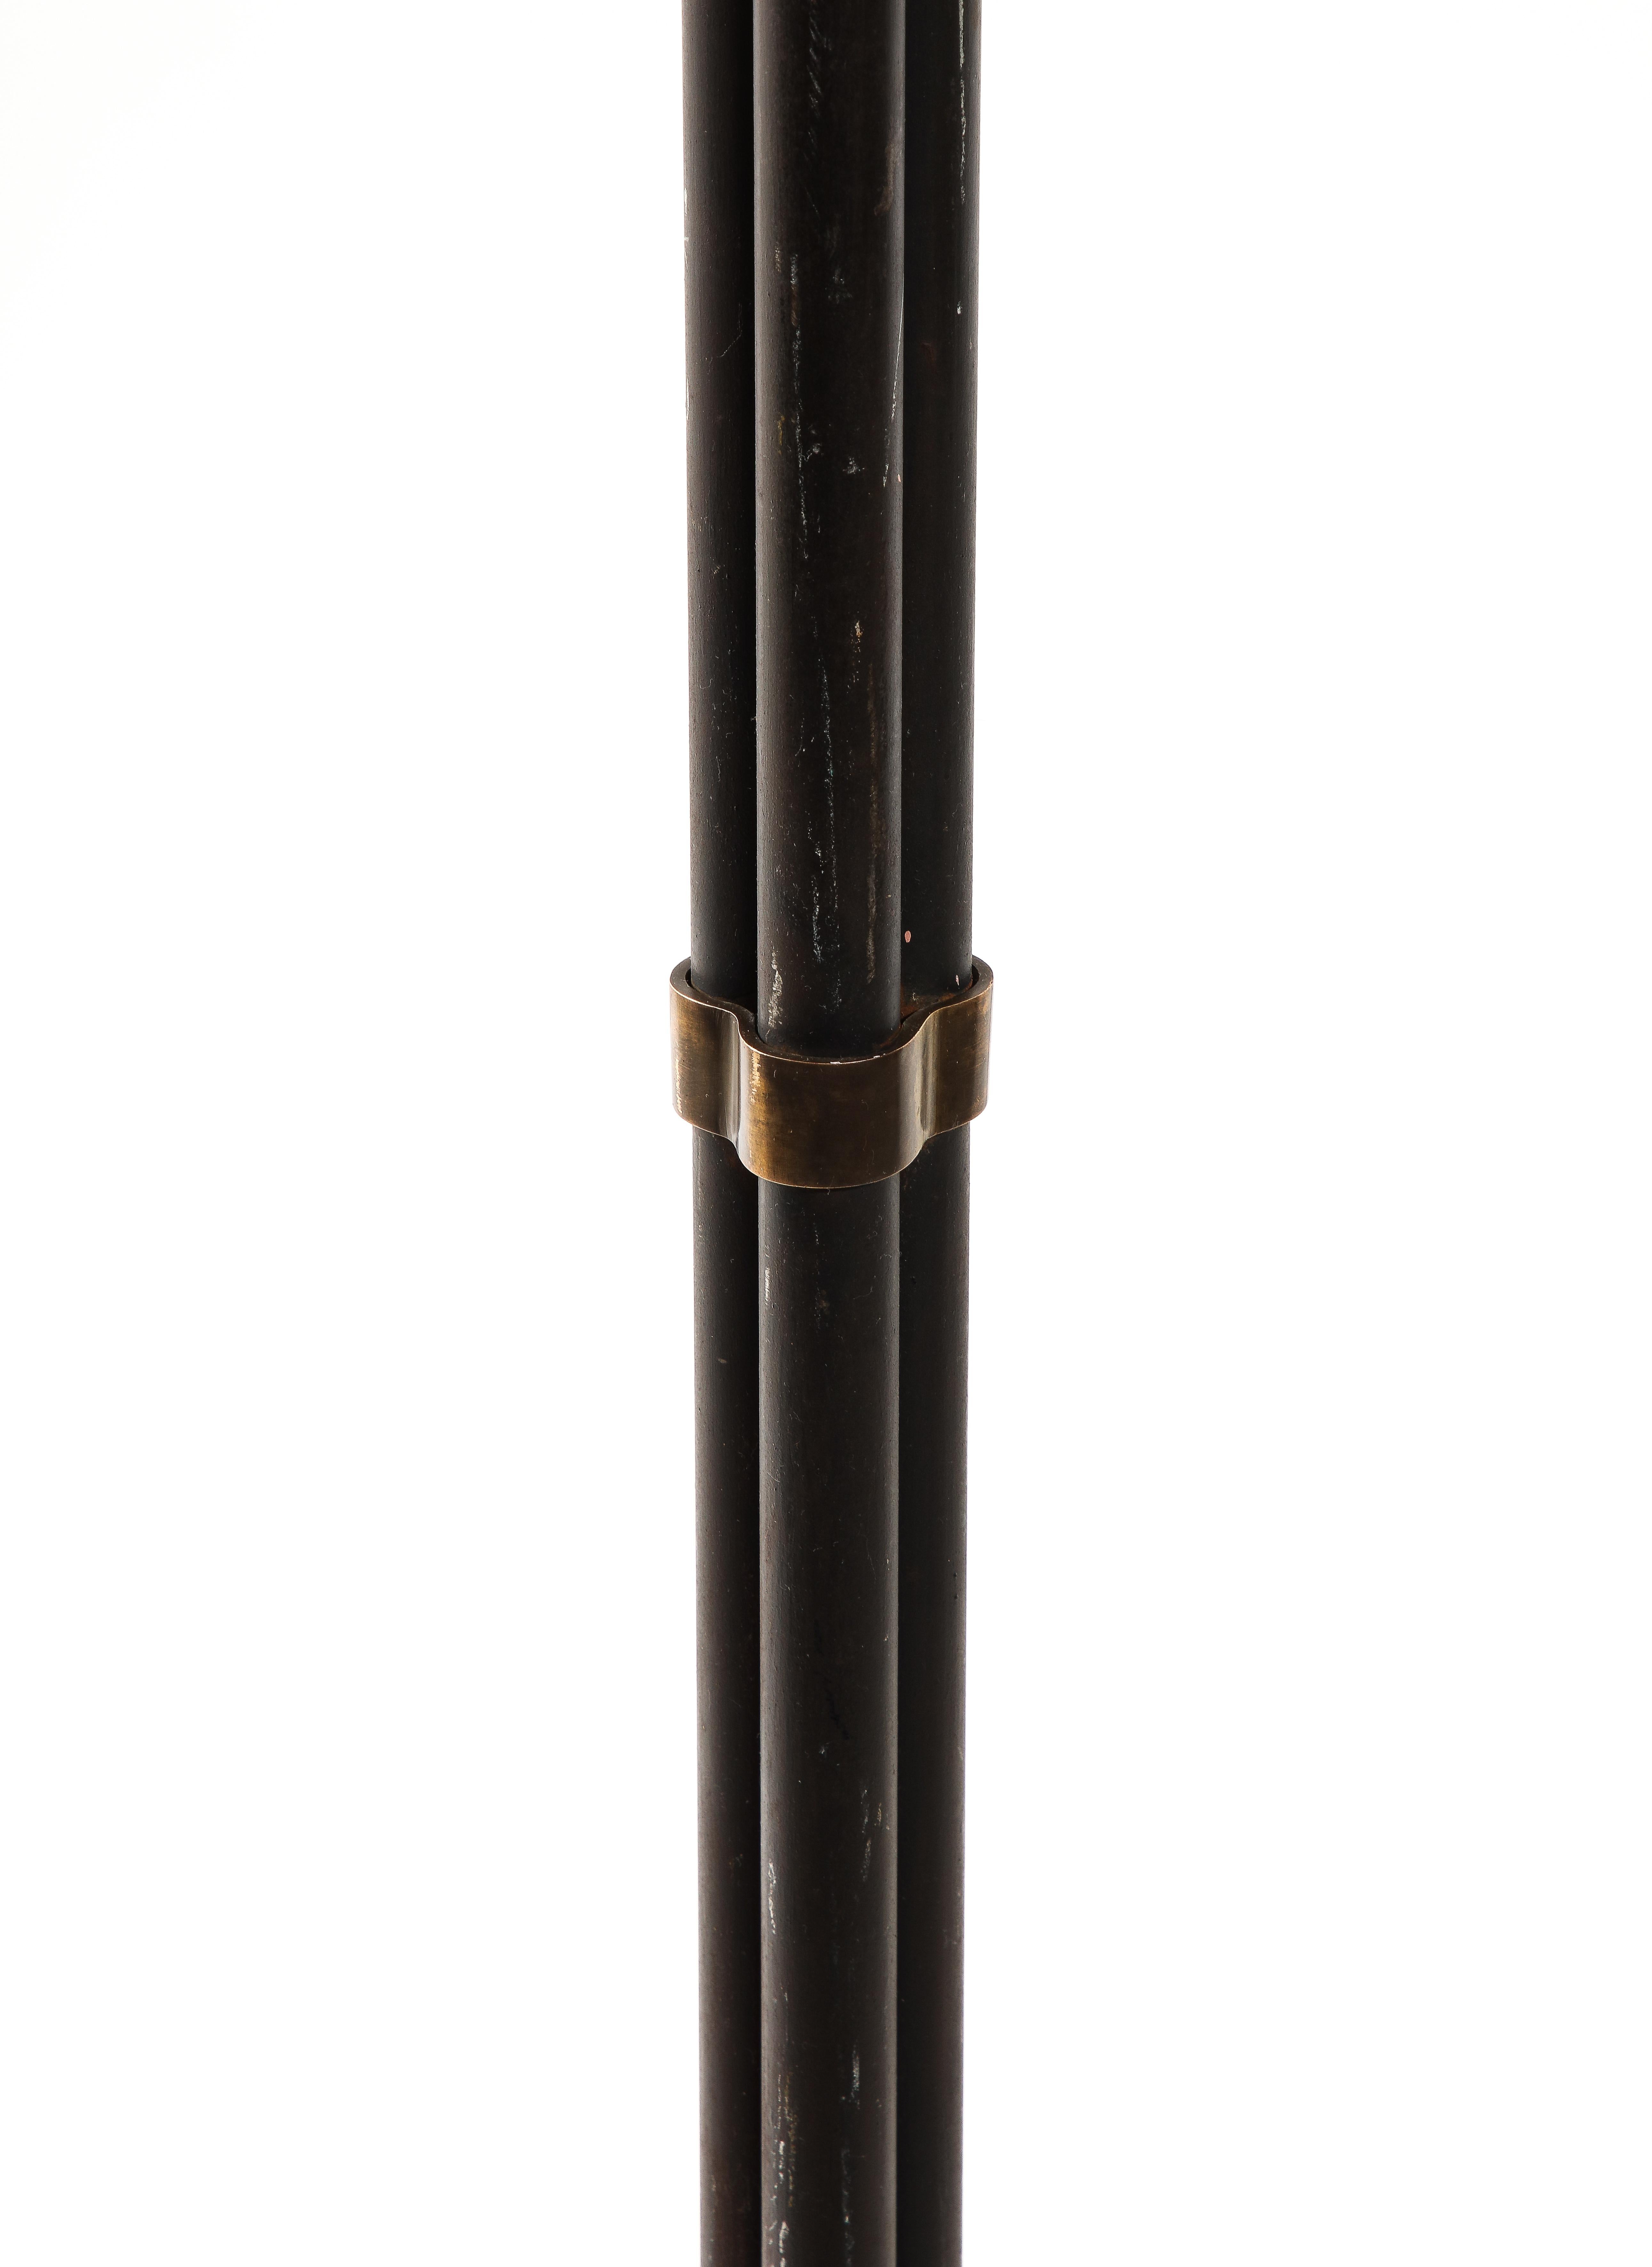 Late 20th Century Brutalist Tripod Steel Tube Floor Lamp with Brass Details - France 1970's For Sale